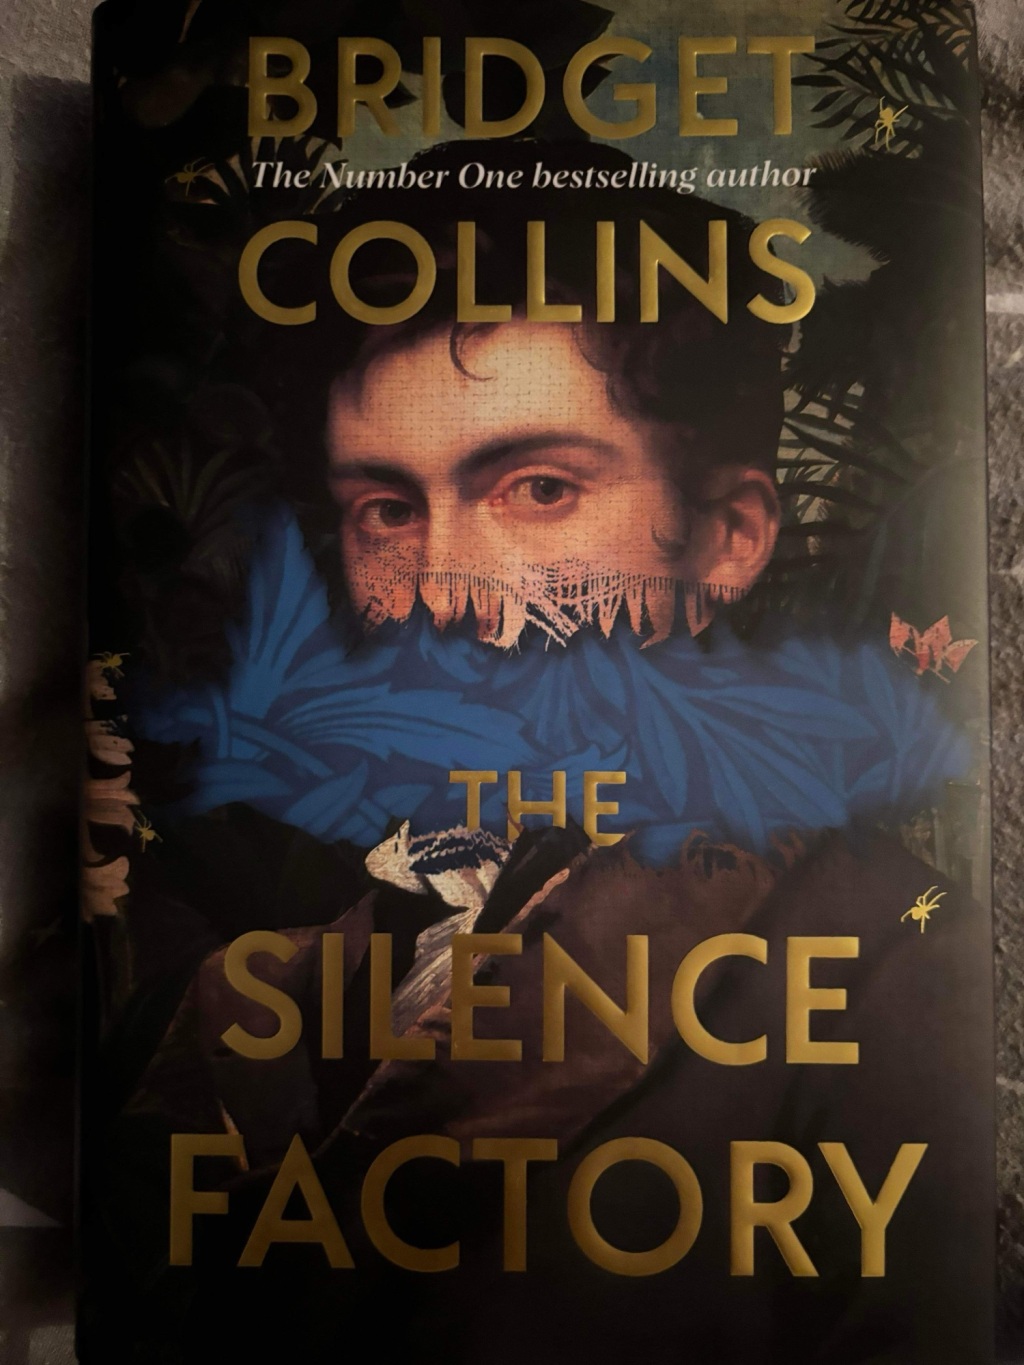 The Silence Factory by Bridget Collins